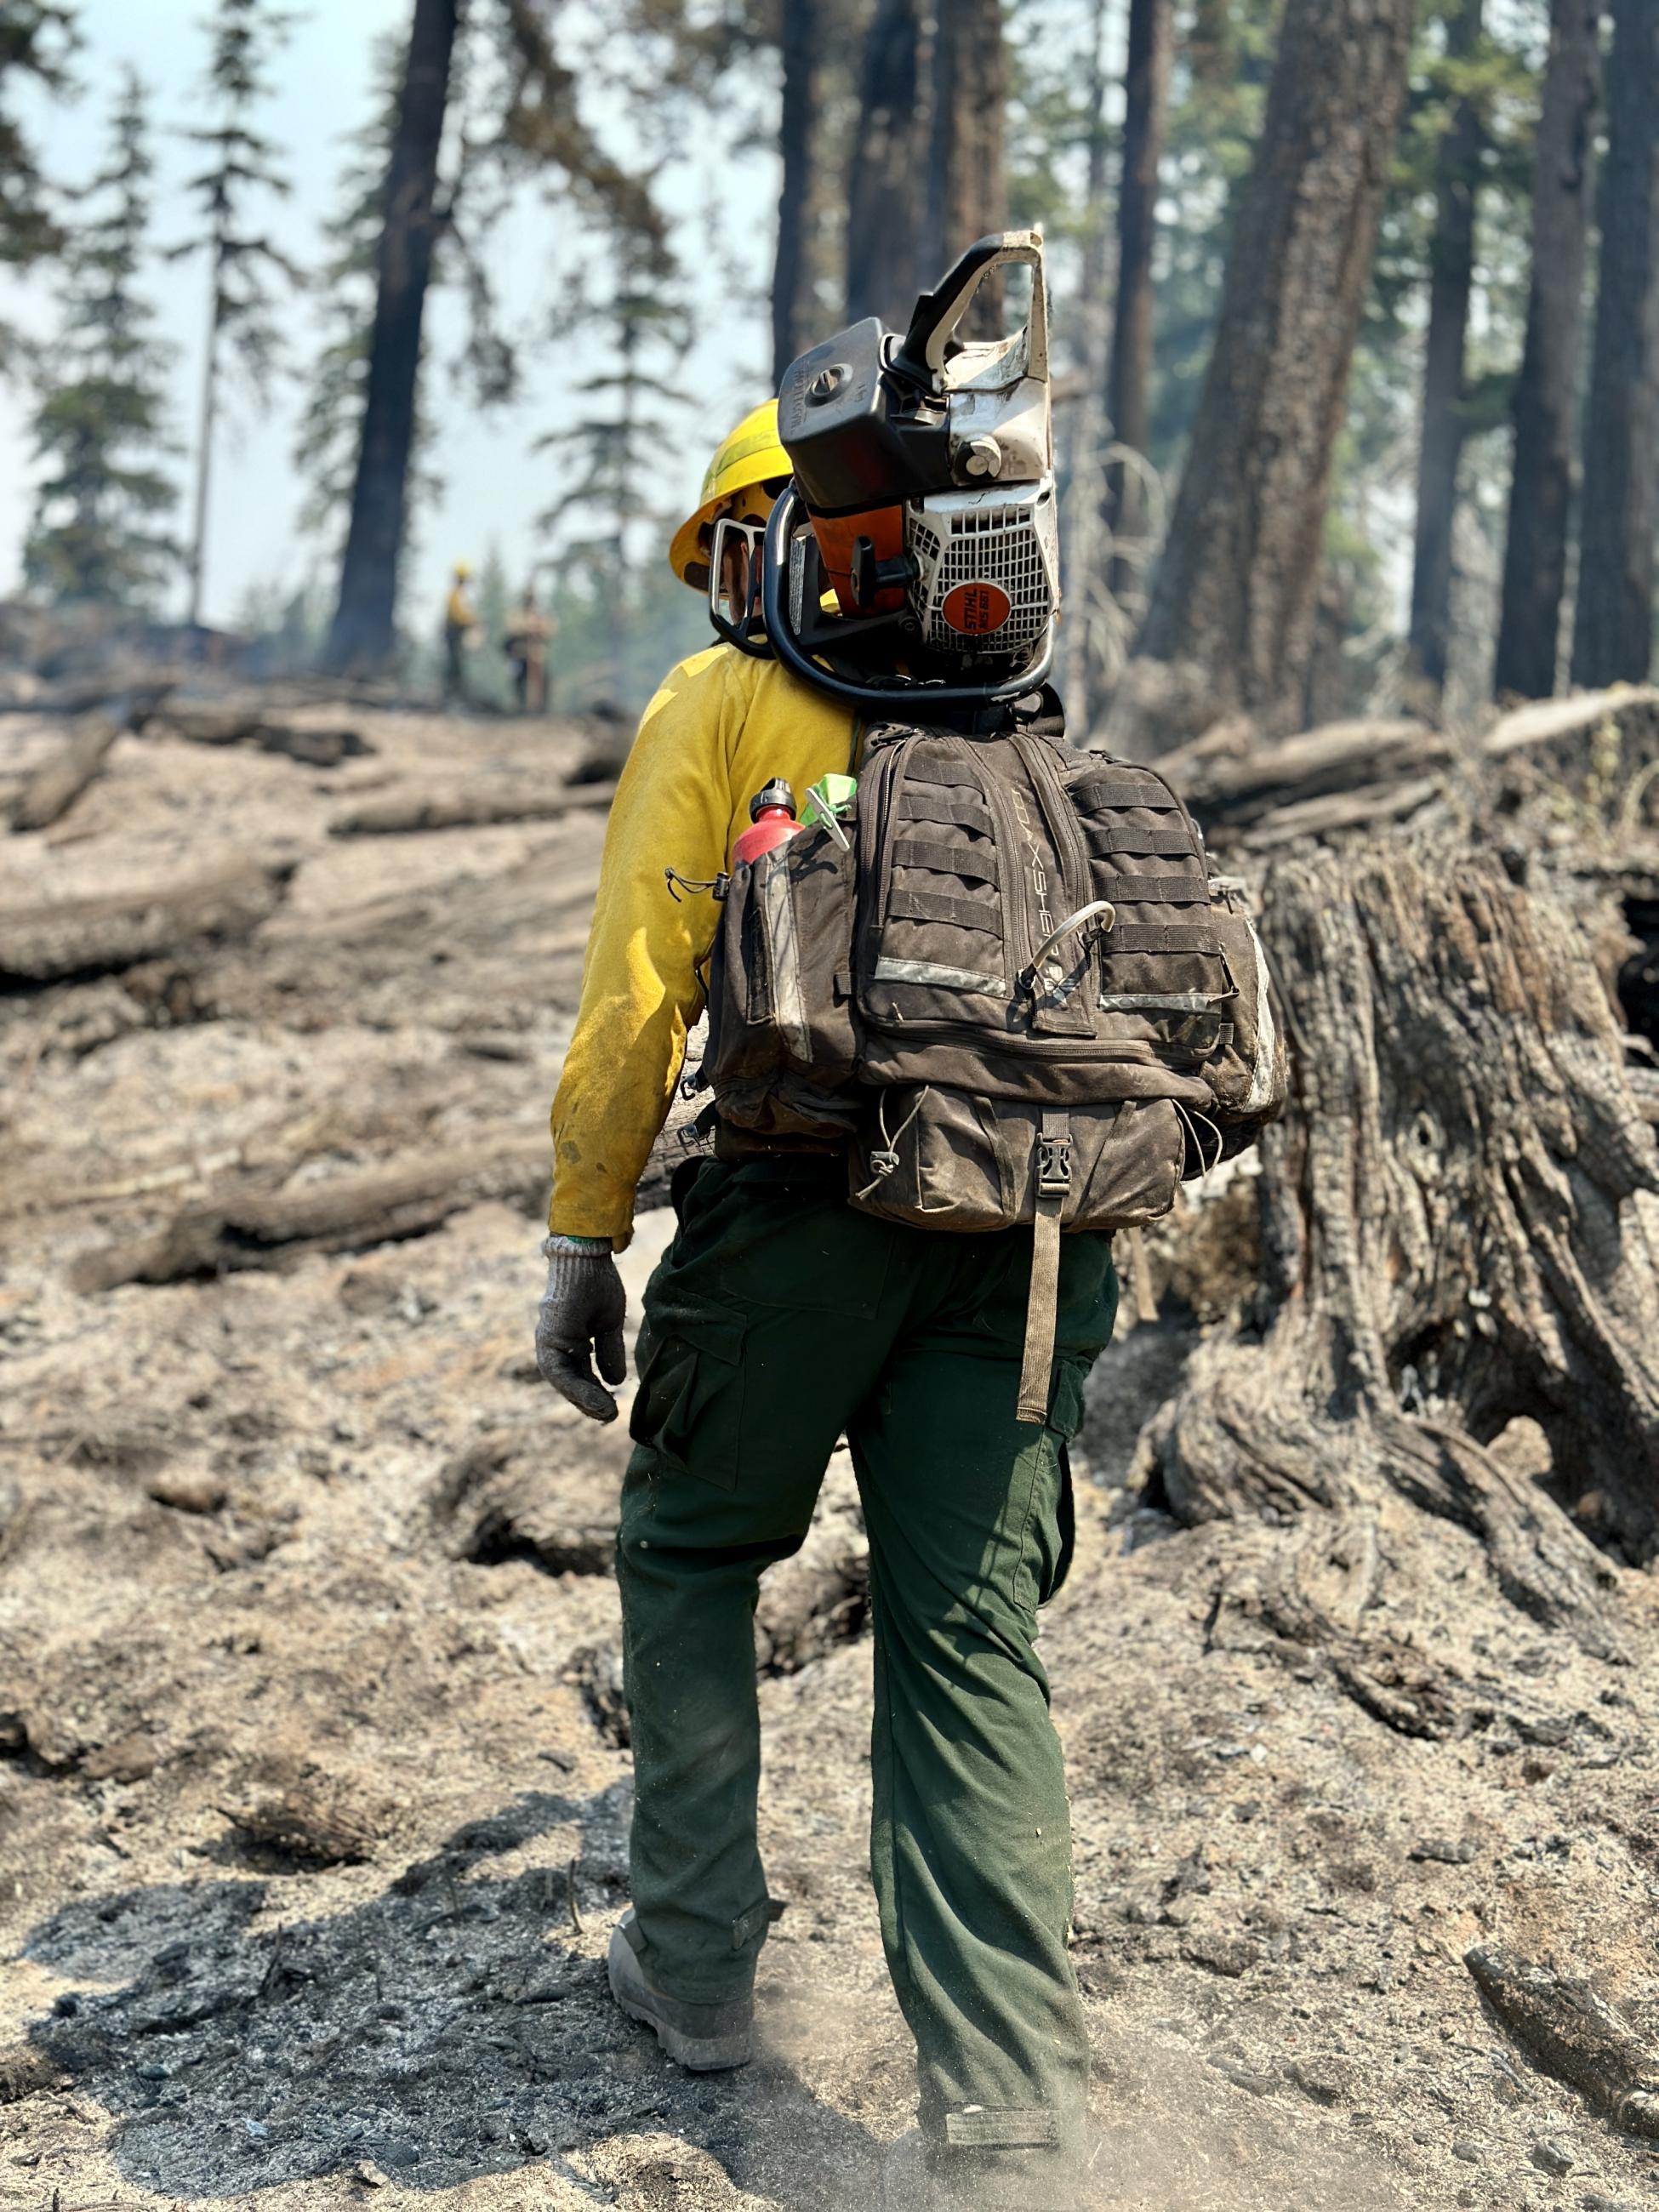 Firefighter carrying a chainsaw through a burned area